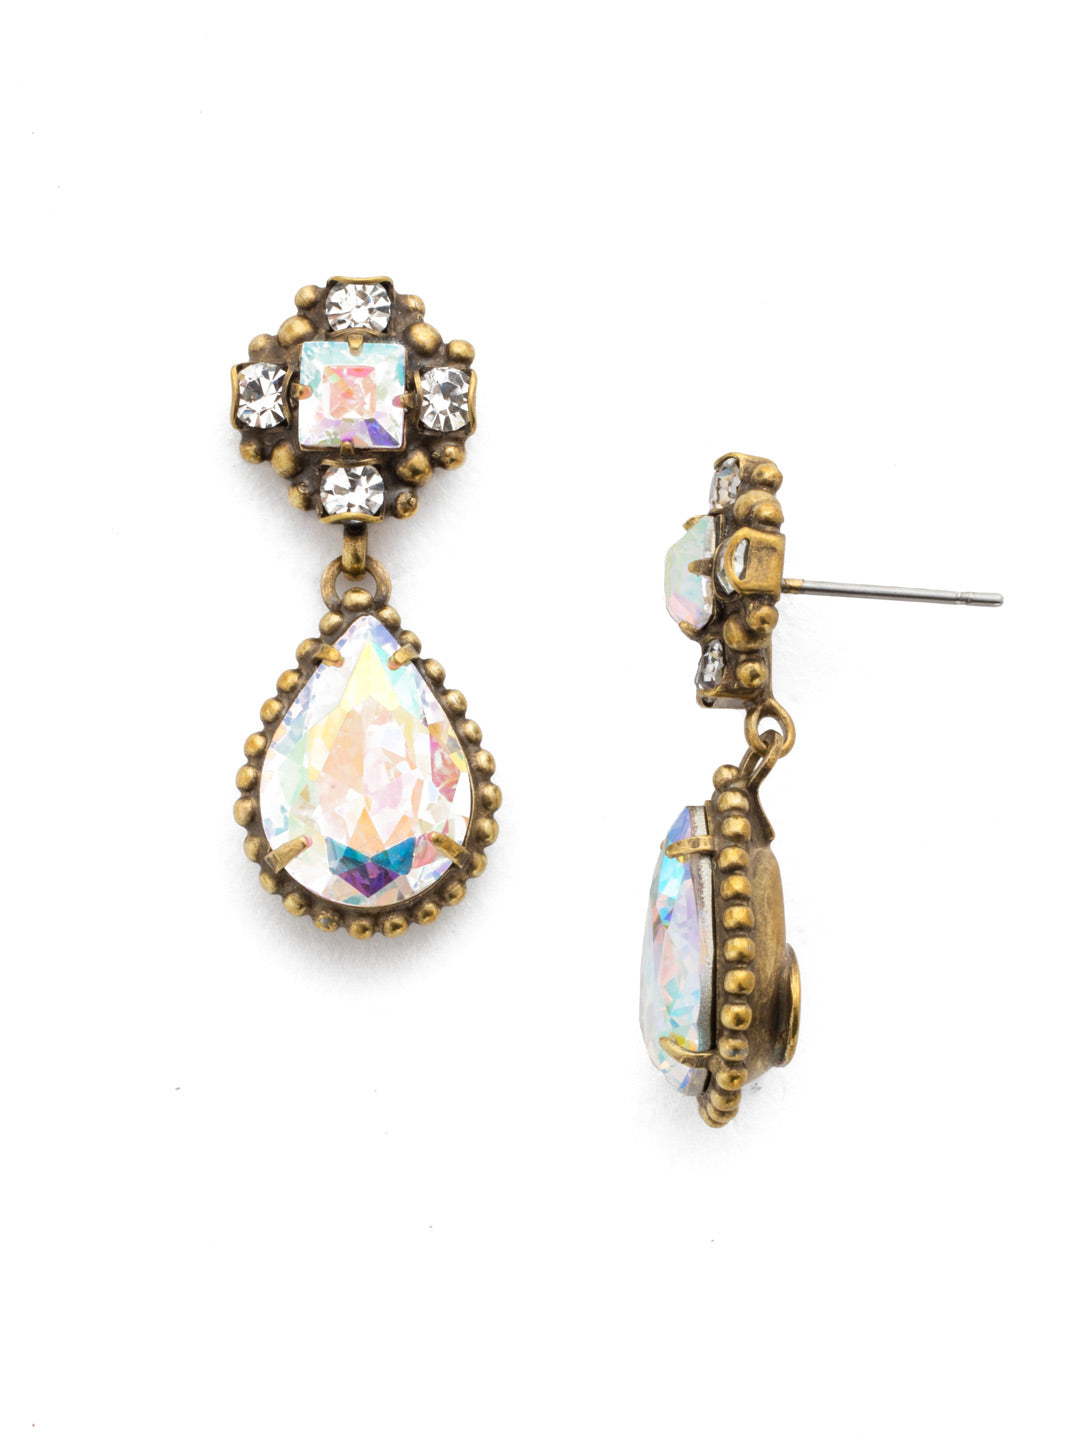 Posey Dangle Earrings - EDT8AGSNF - Pear shaped crystals set in decorative edging alternate with vintage inspired crystal clusters for a unique design.